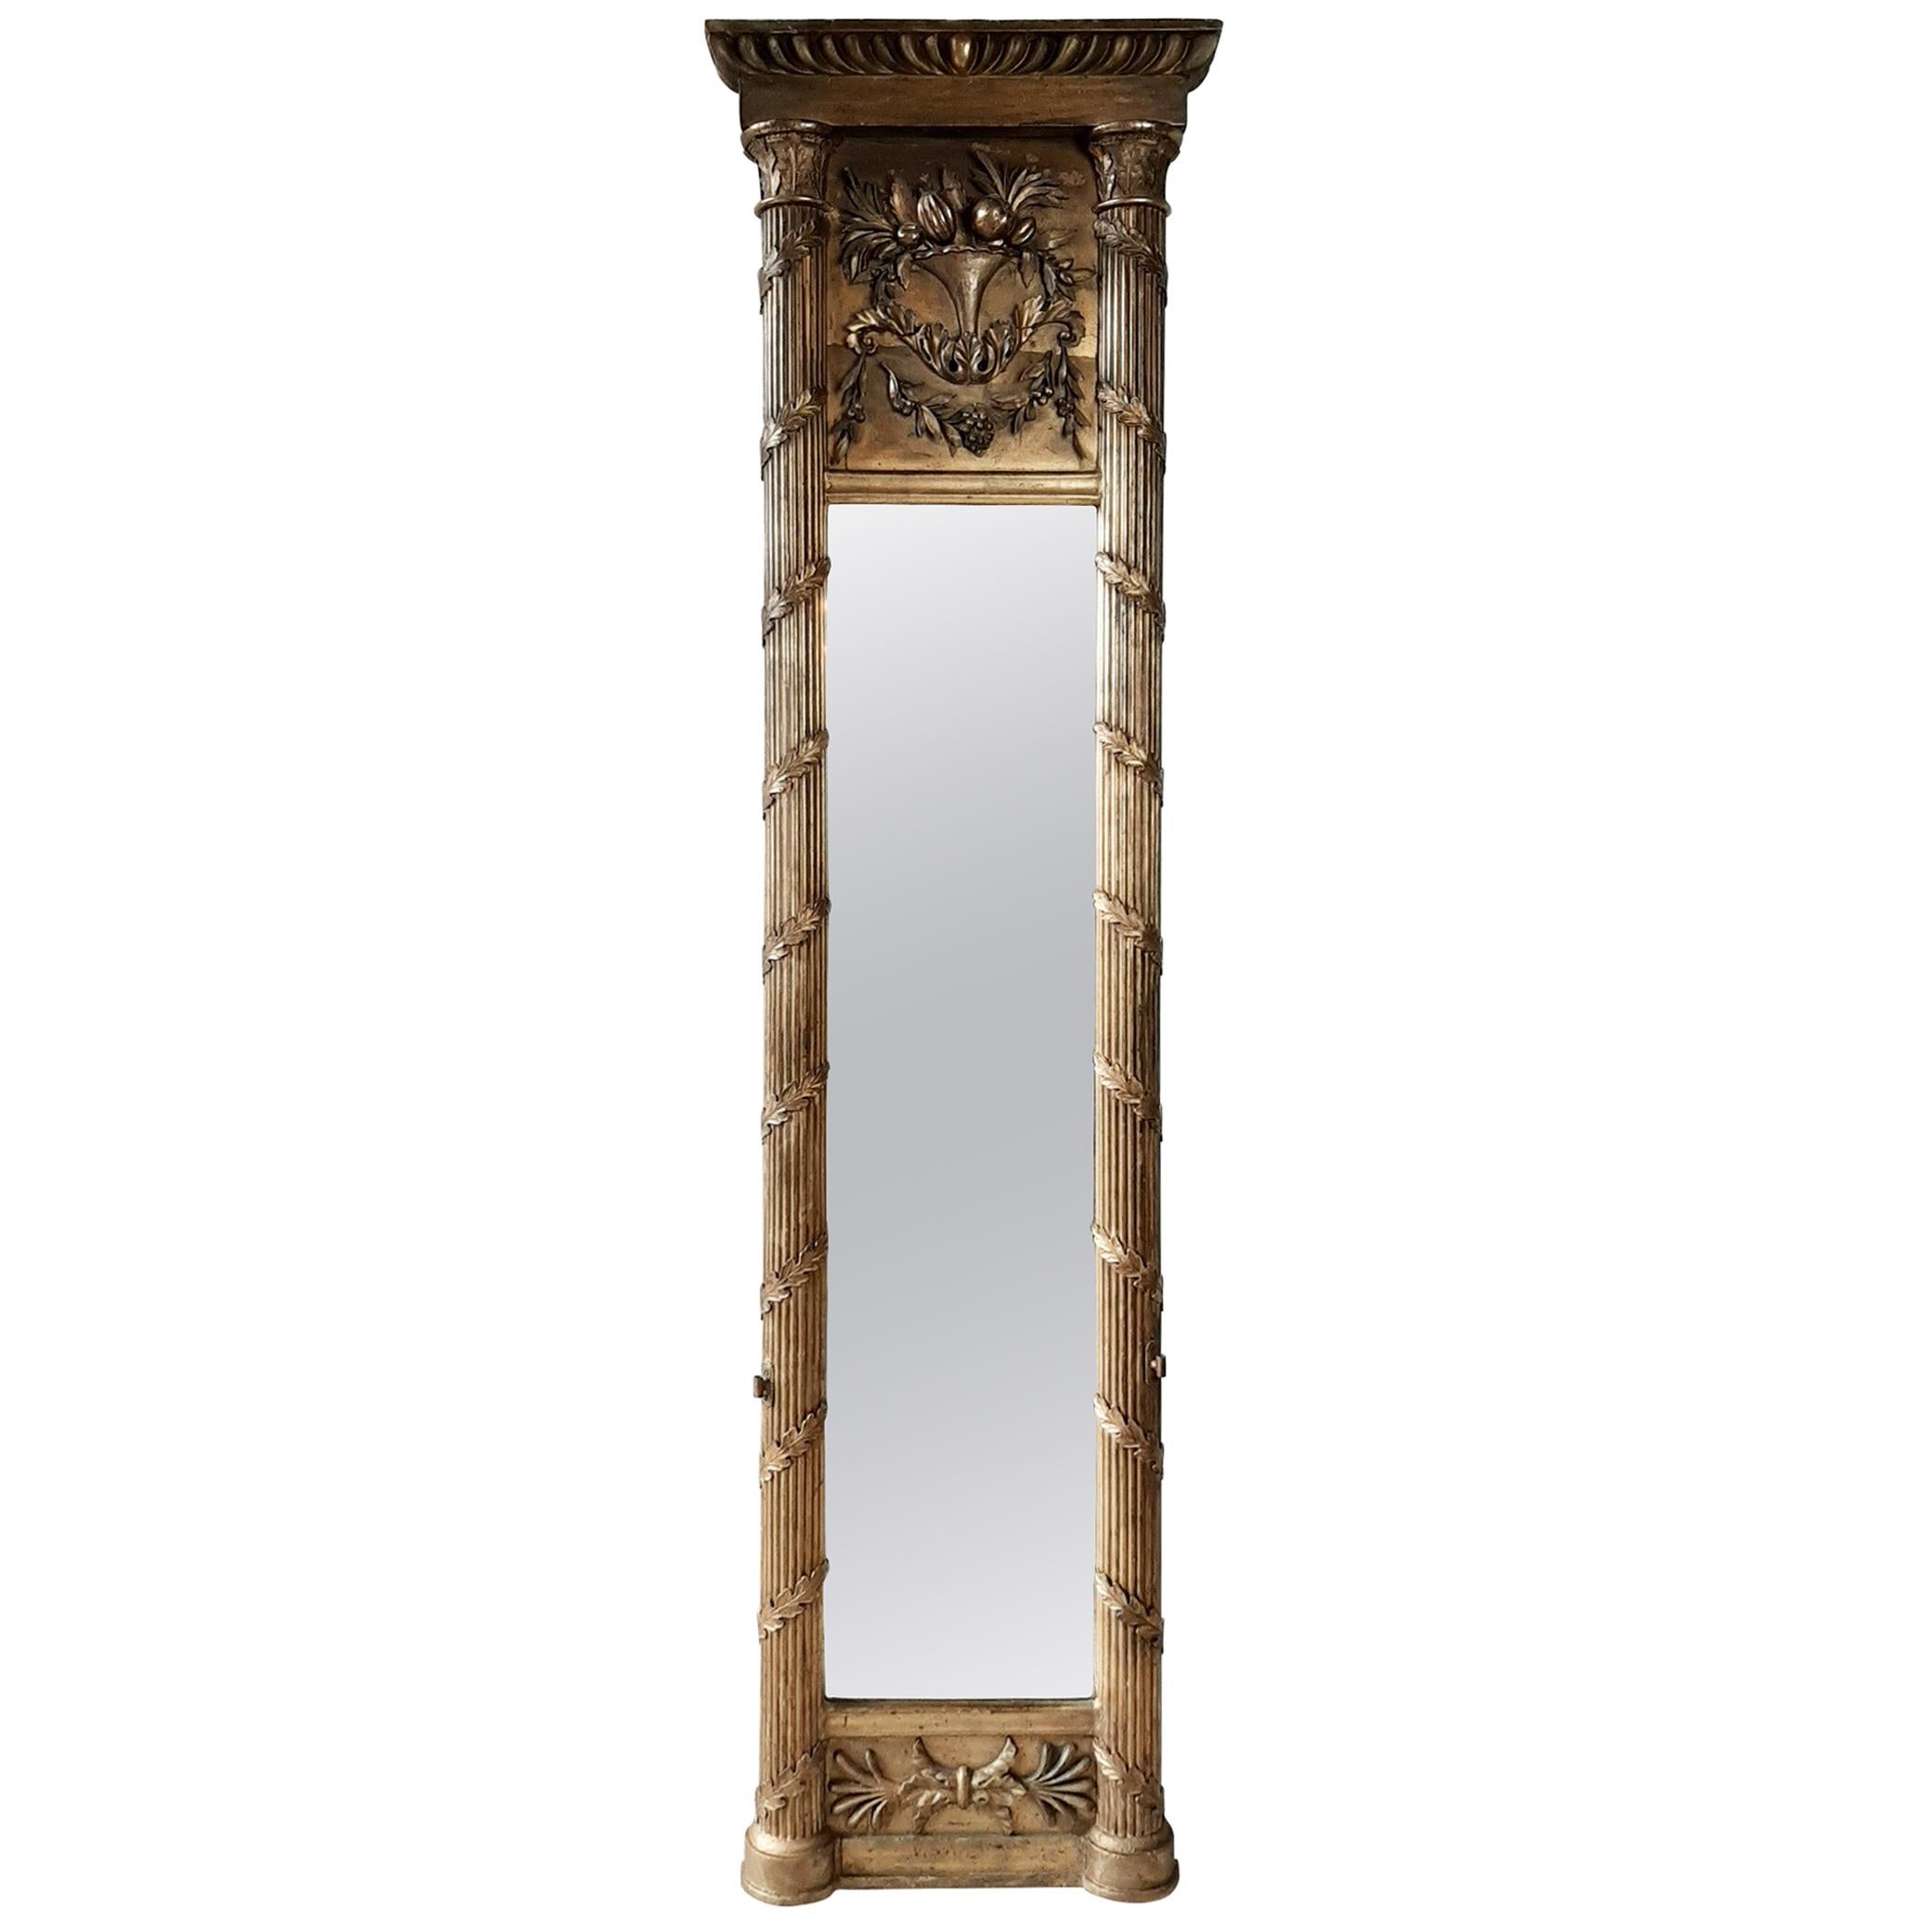 19th Century Very High, Narrow Penant Giltwood Mirror in Empire Style